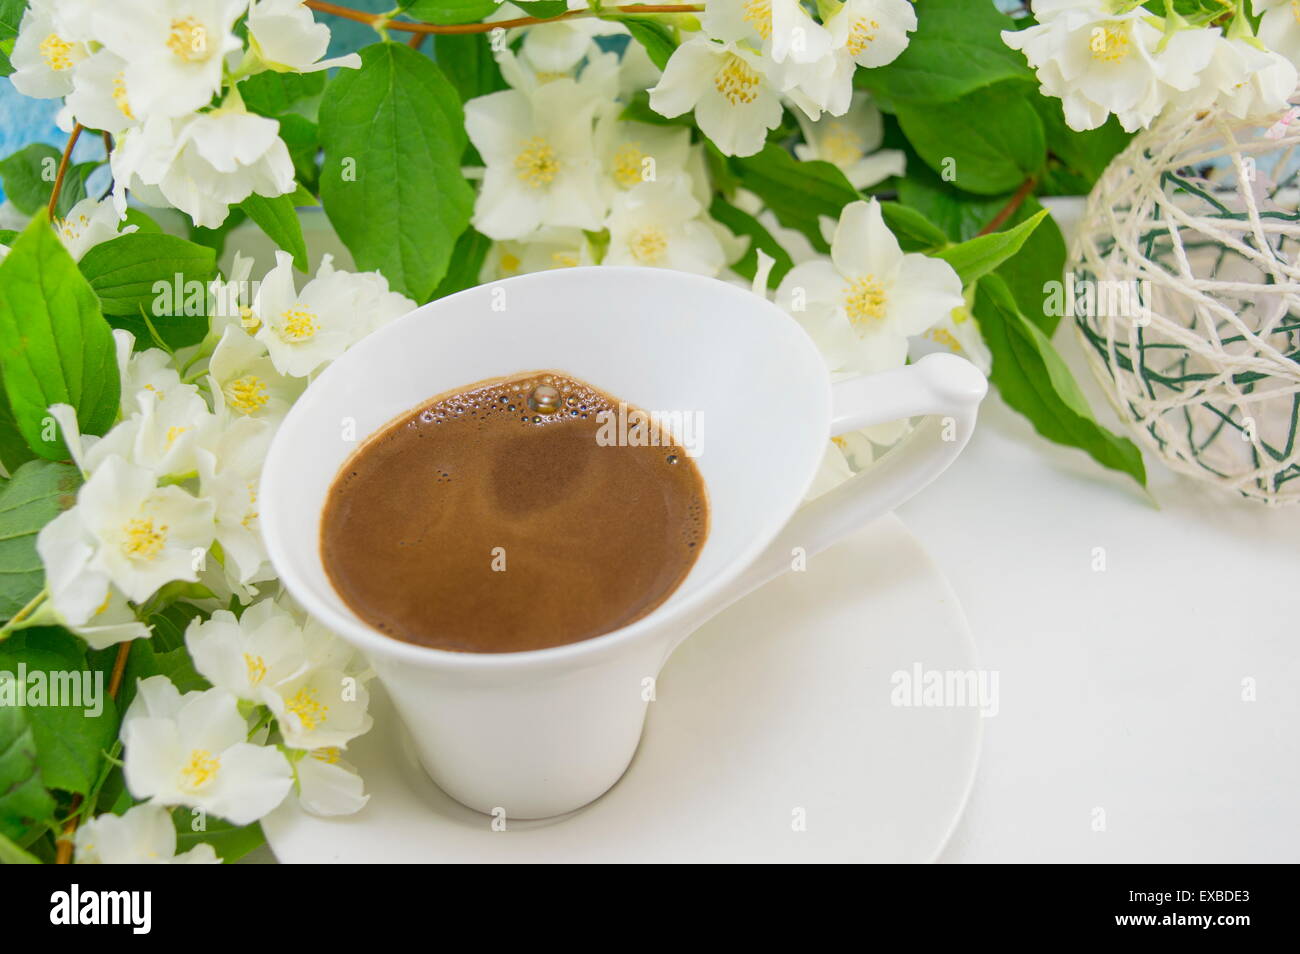 White cup of coffee on a wooden table decorated with flowers Stock Photo